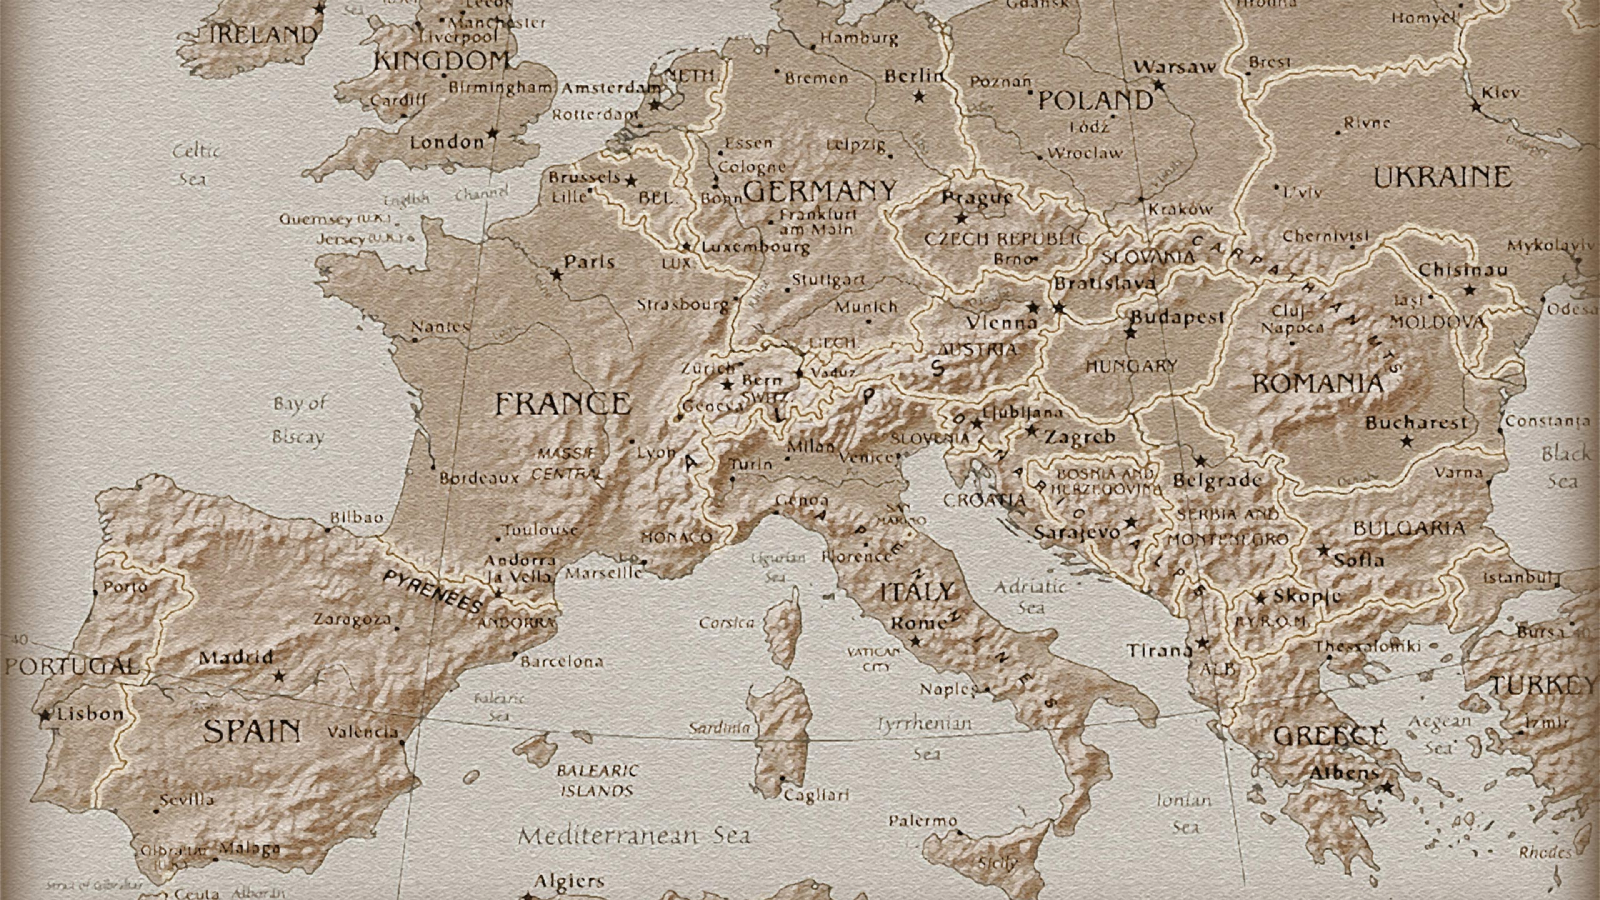 Free download europe old map wallpaper 13621 2560x1600jpg [2560x1600] for your Desktop, Mobile & Tablet. Explore Map Wallpaper. Map Wallpaper for Walls, World Map Wallpaper, Game of Thrones Map Wallpaper